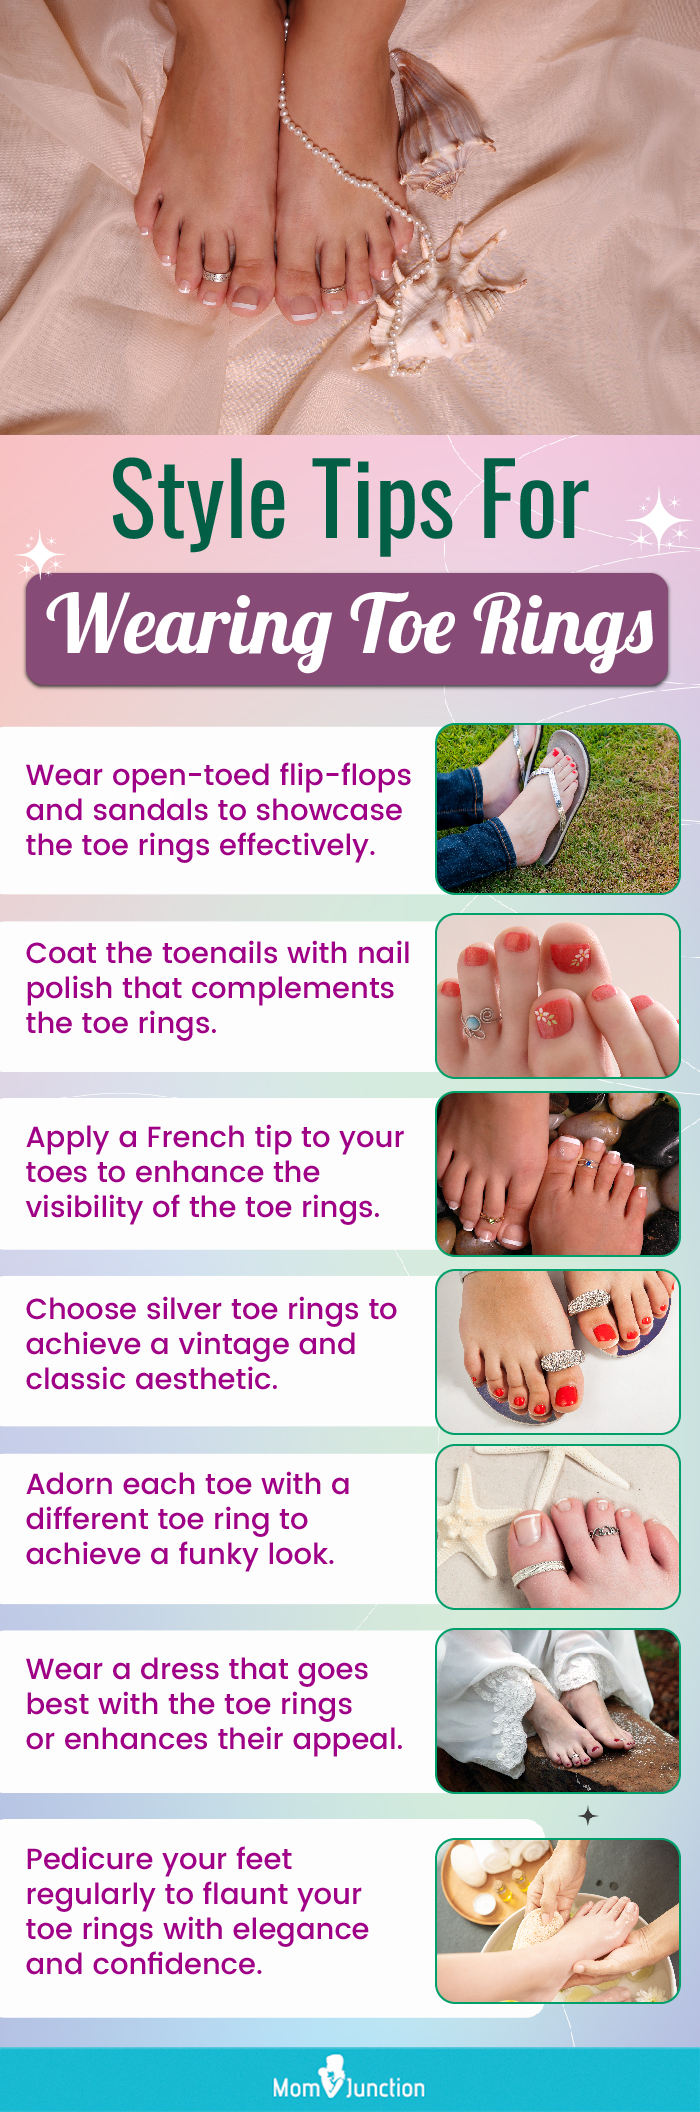 Why do women wear a toe ring? - Significance of wearing toe ring